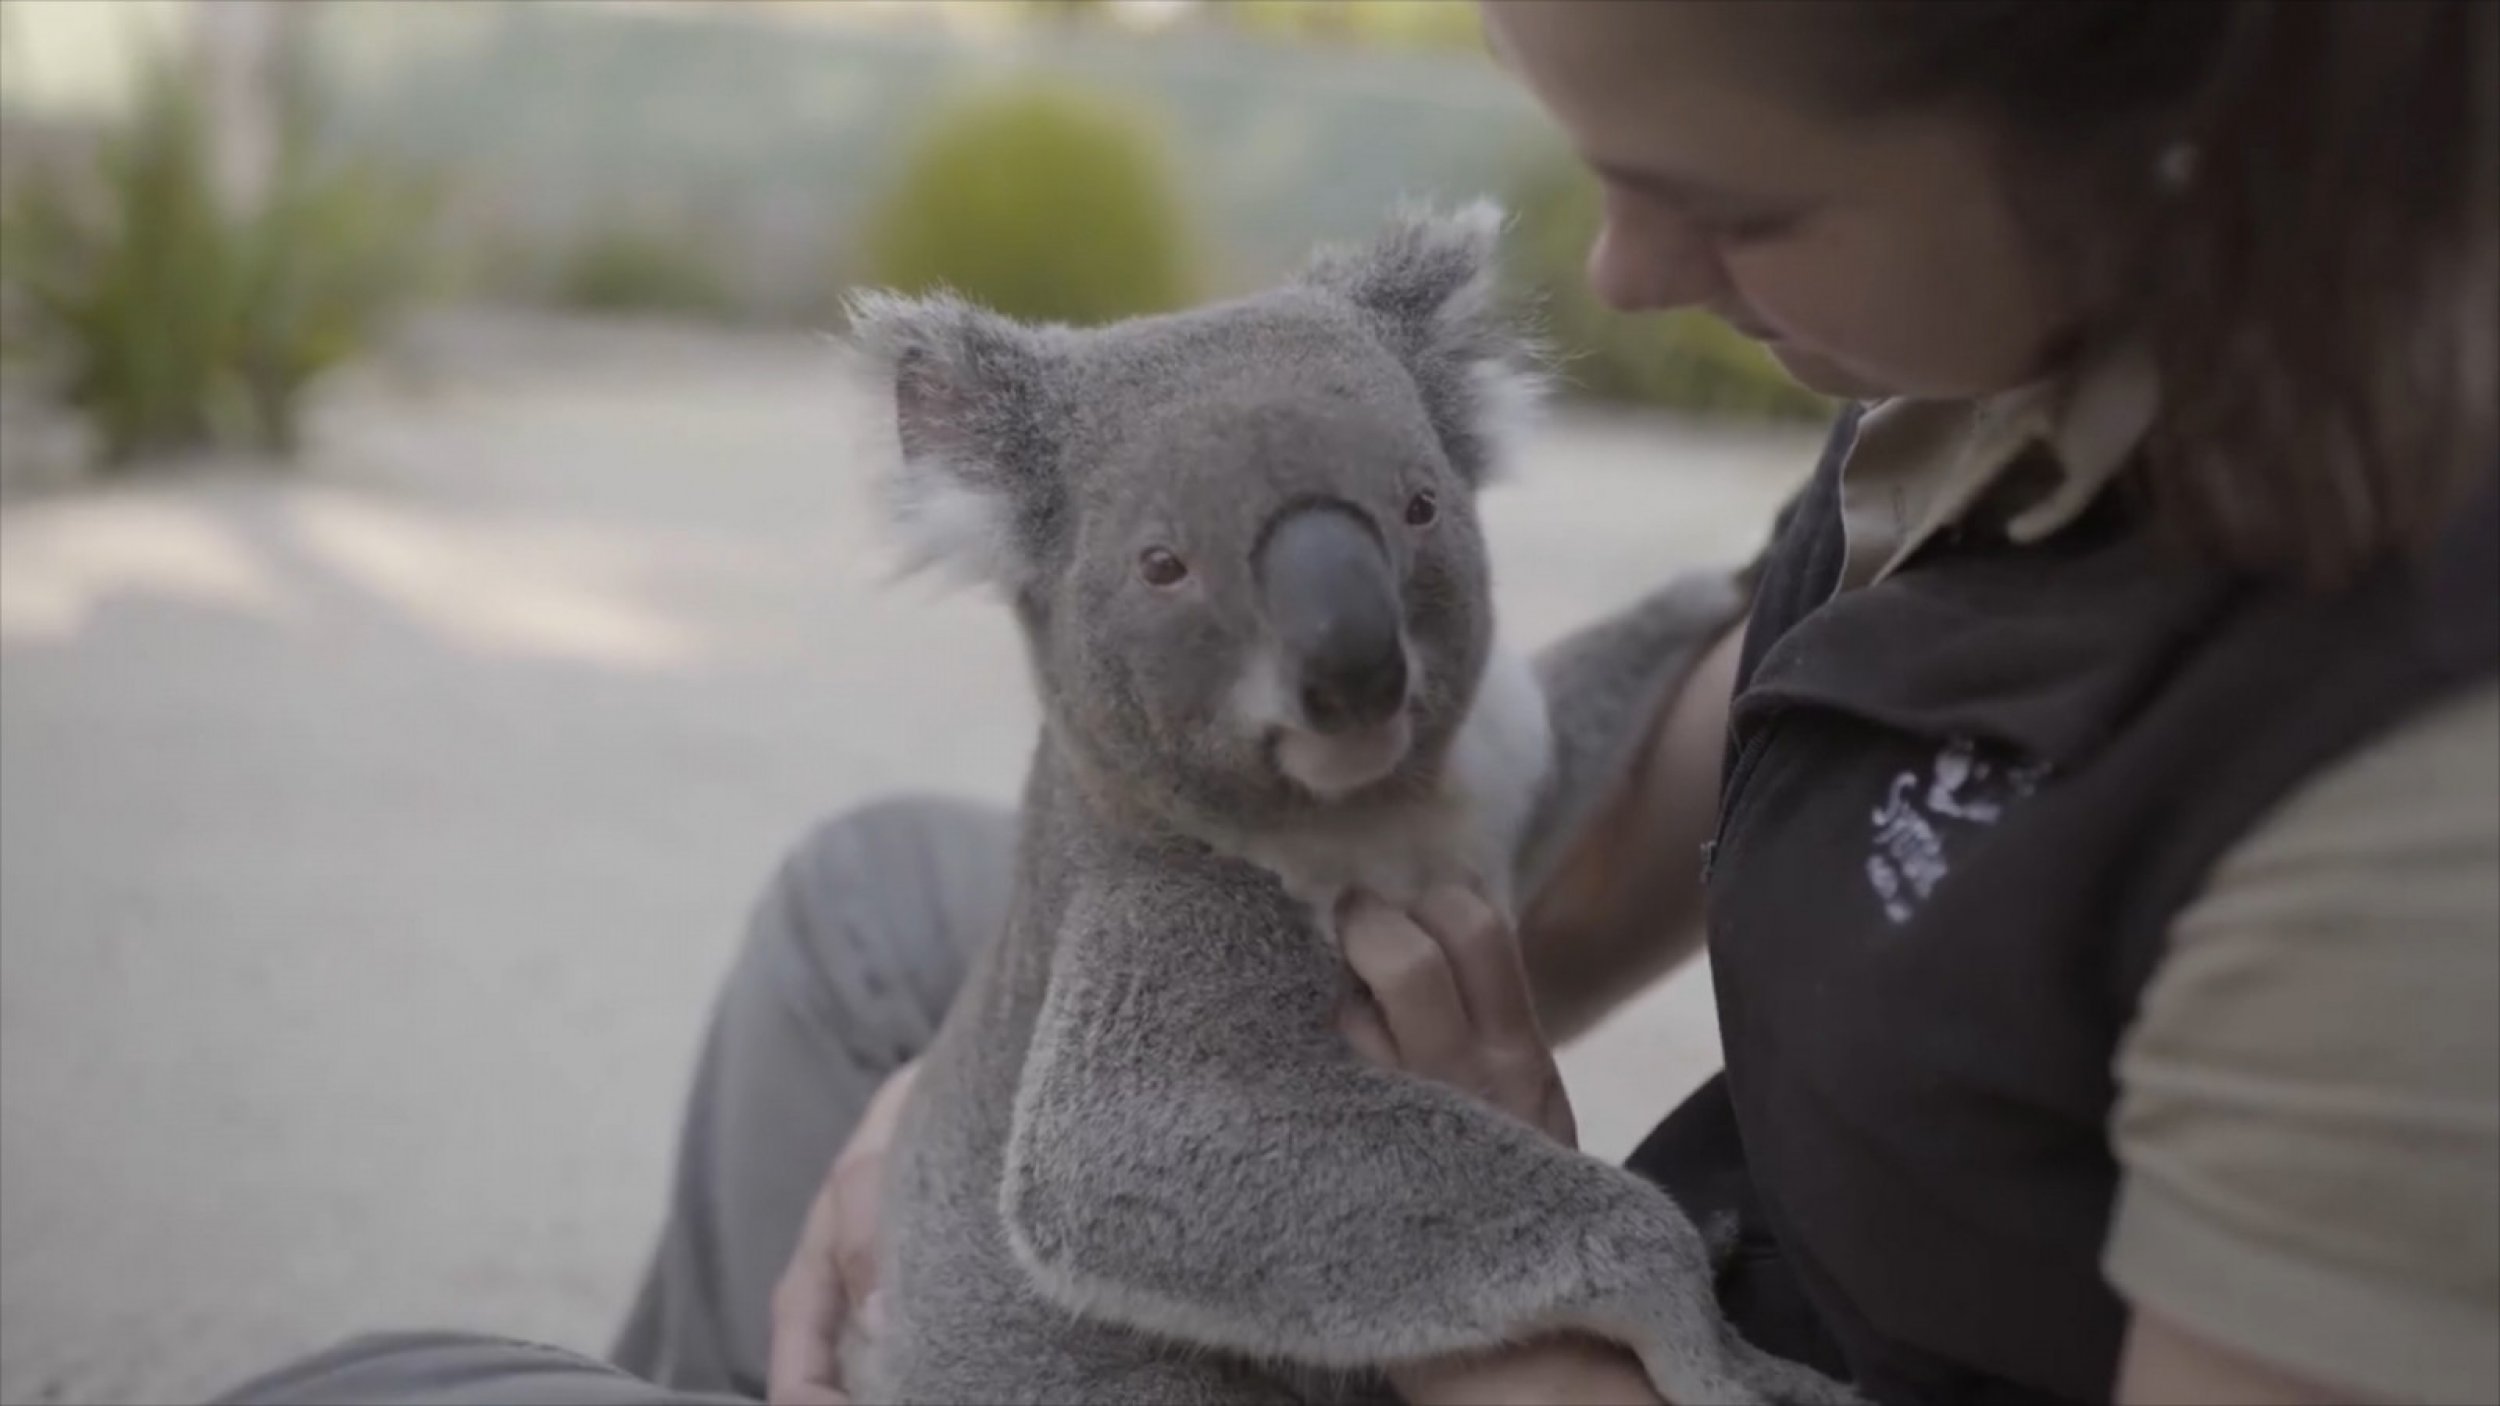 These Koalas Love Getting Massages